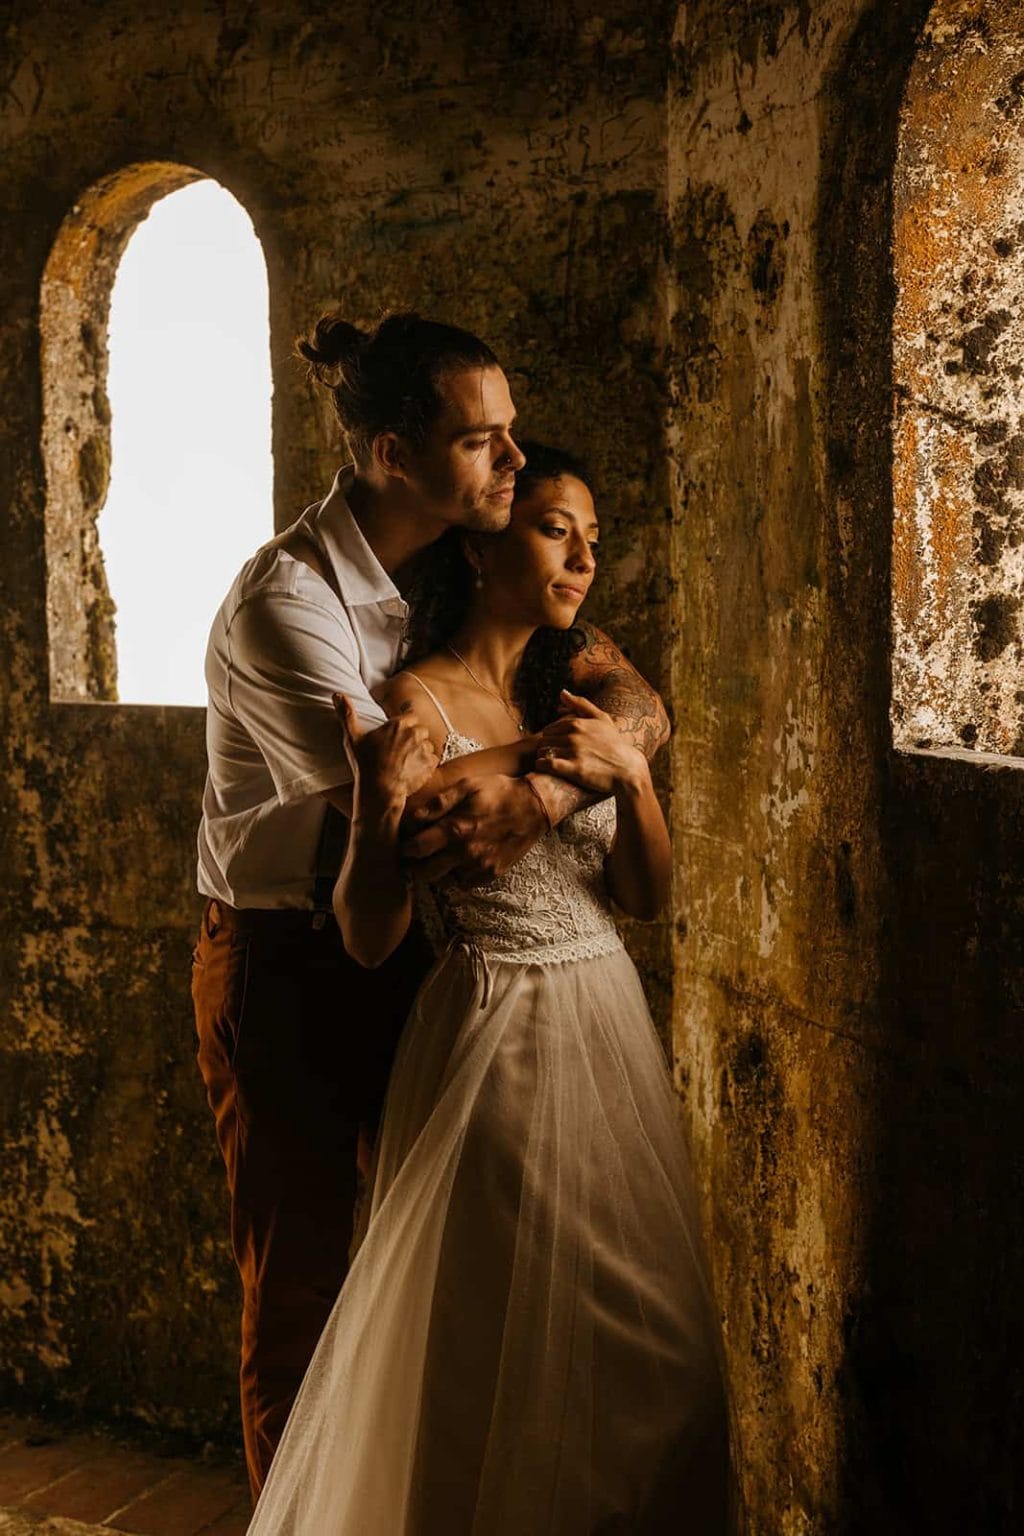 A bride and groom embrace as they look out of the window in a castle.